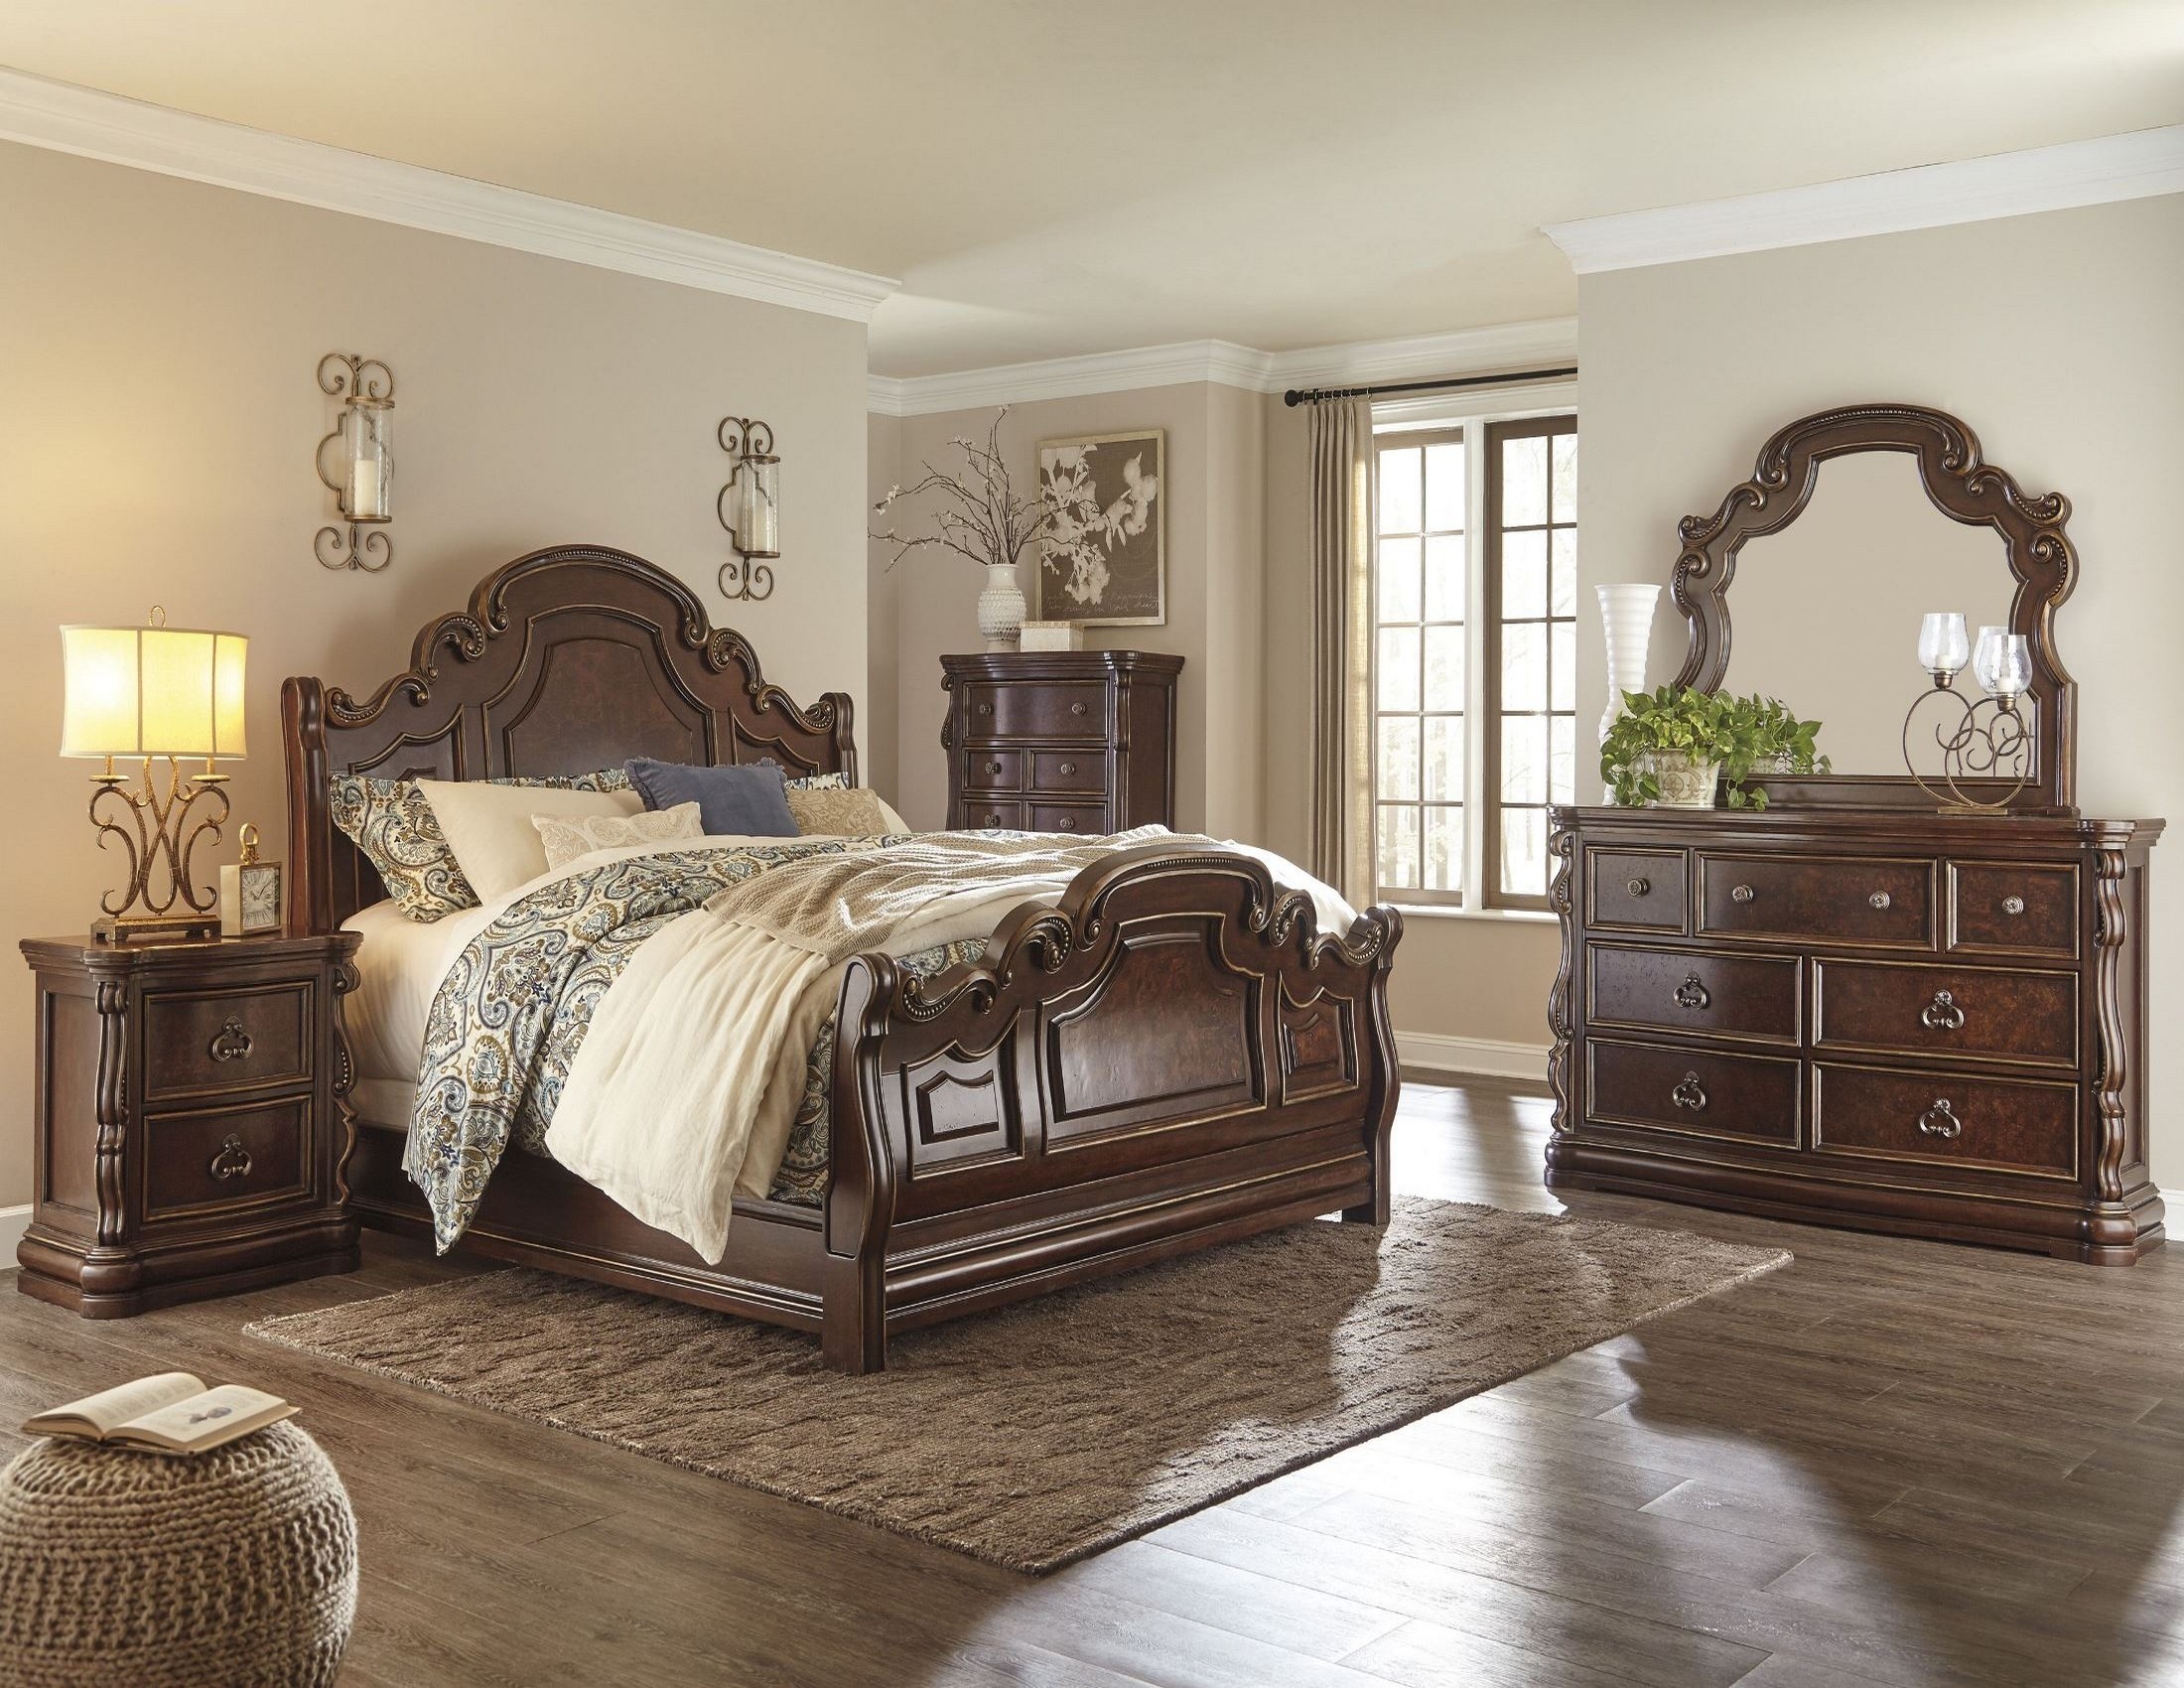 Accent Pillows On Brown Bedroom Furniture